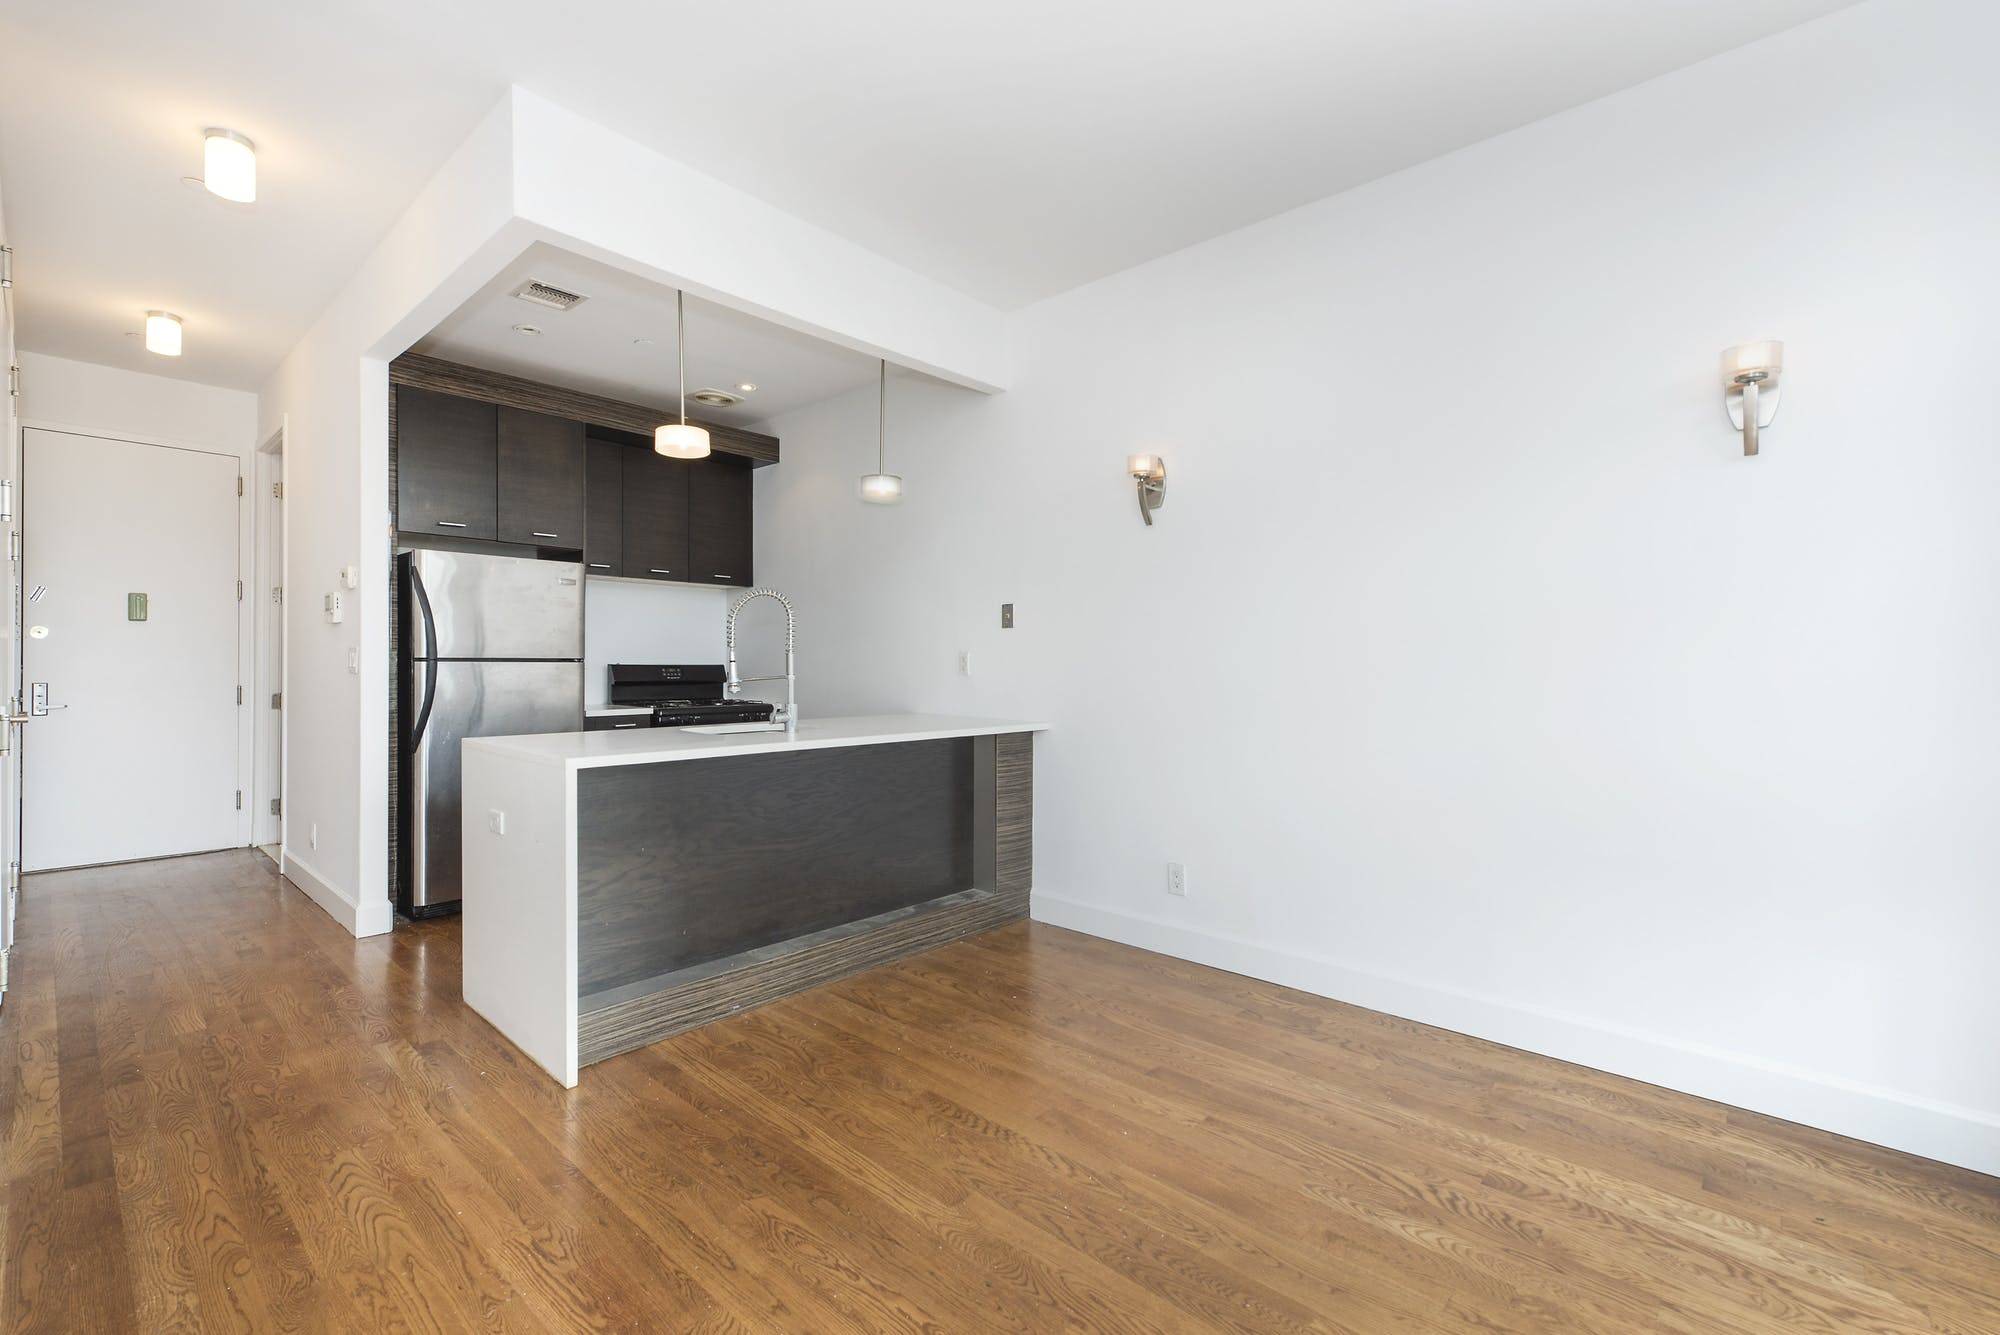 Rent Stabilized One Month Free 3117 net, 3400 gross Welcome to 1380 Bedford Ave, a unique collection of modern luxury apartments in, unmistakably, one of the best locations in Brooklyn ...